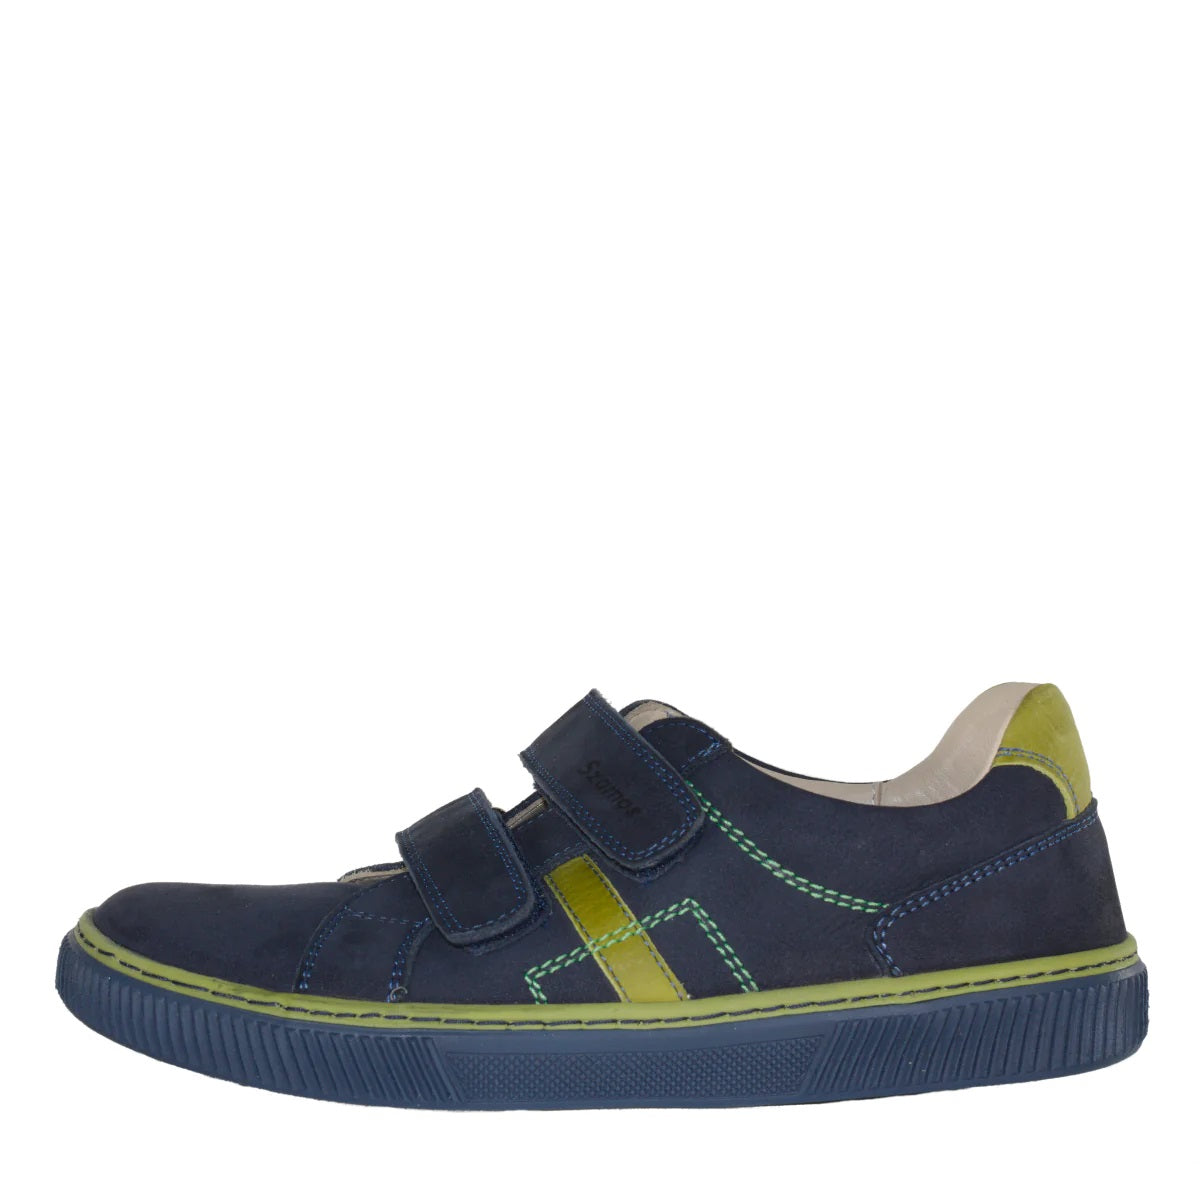 Szamos Kid Boy Sneakers In Dark Blue And Neon Green Color With Double Velcro Strap - Made In Europe - shoekid.ca